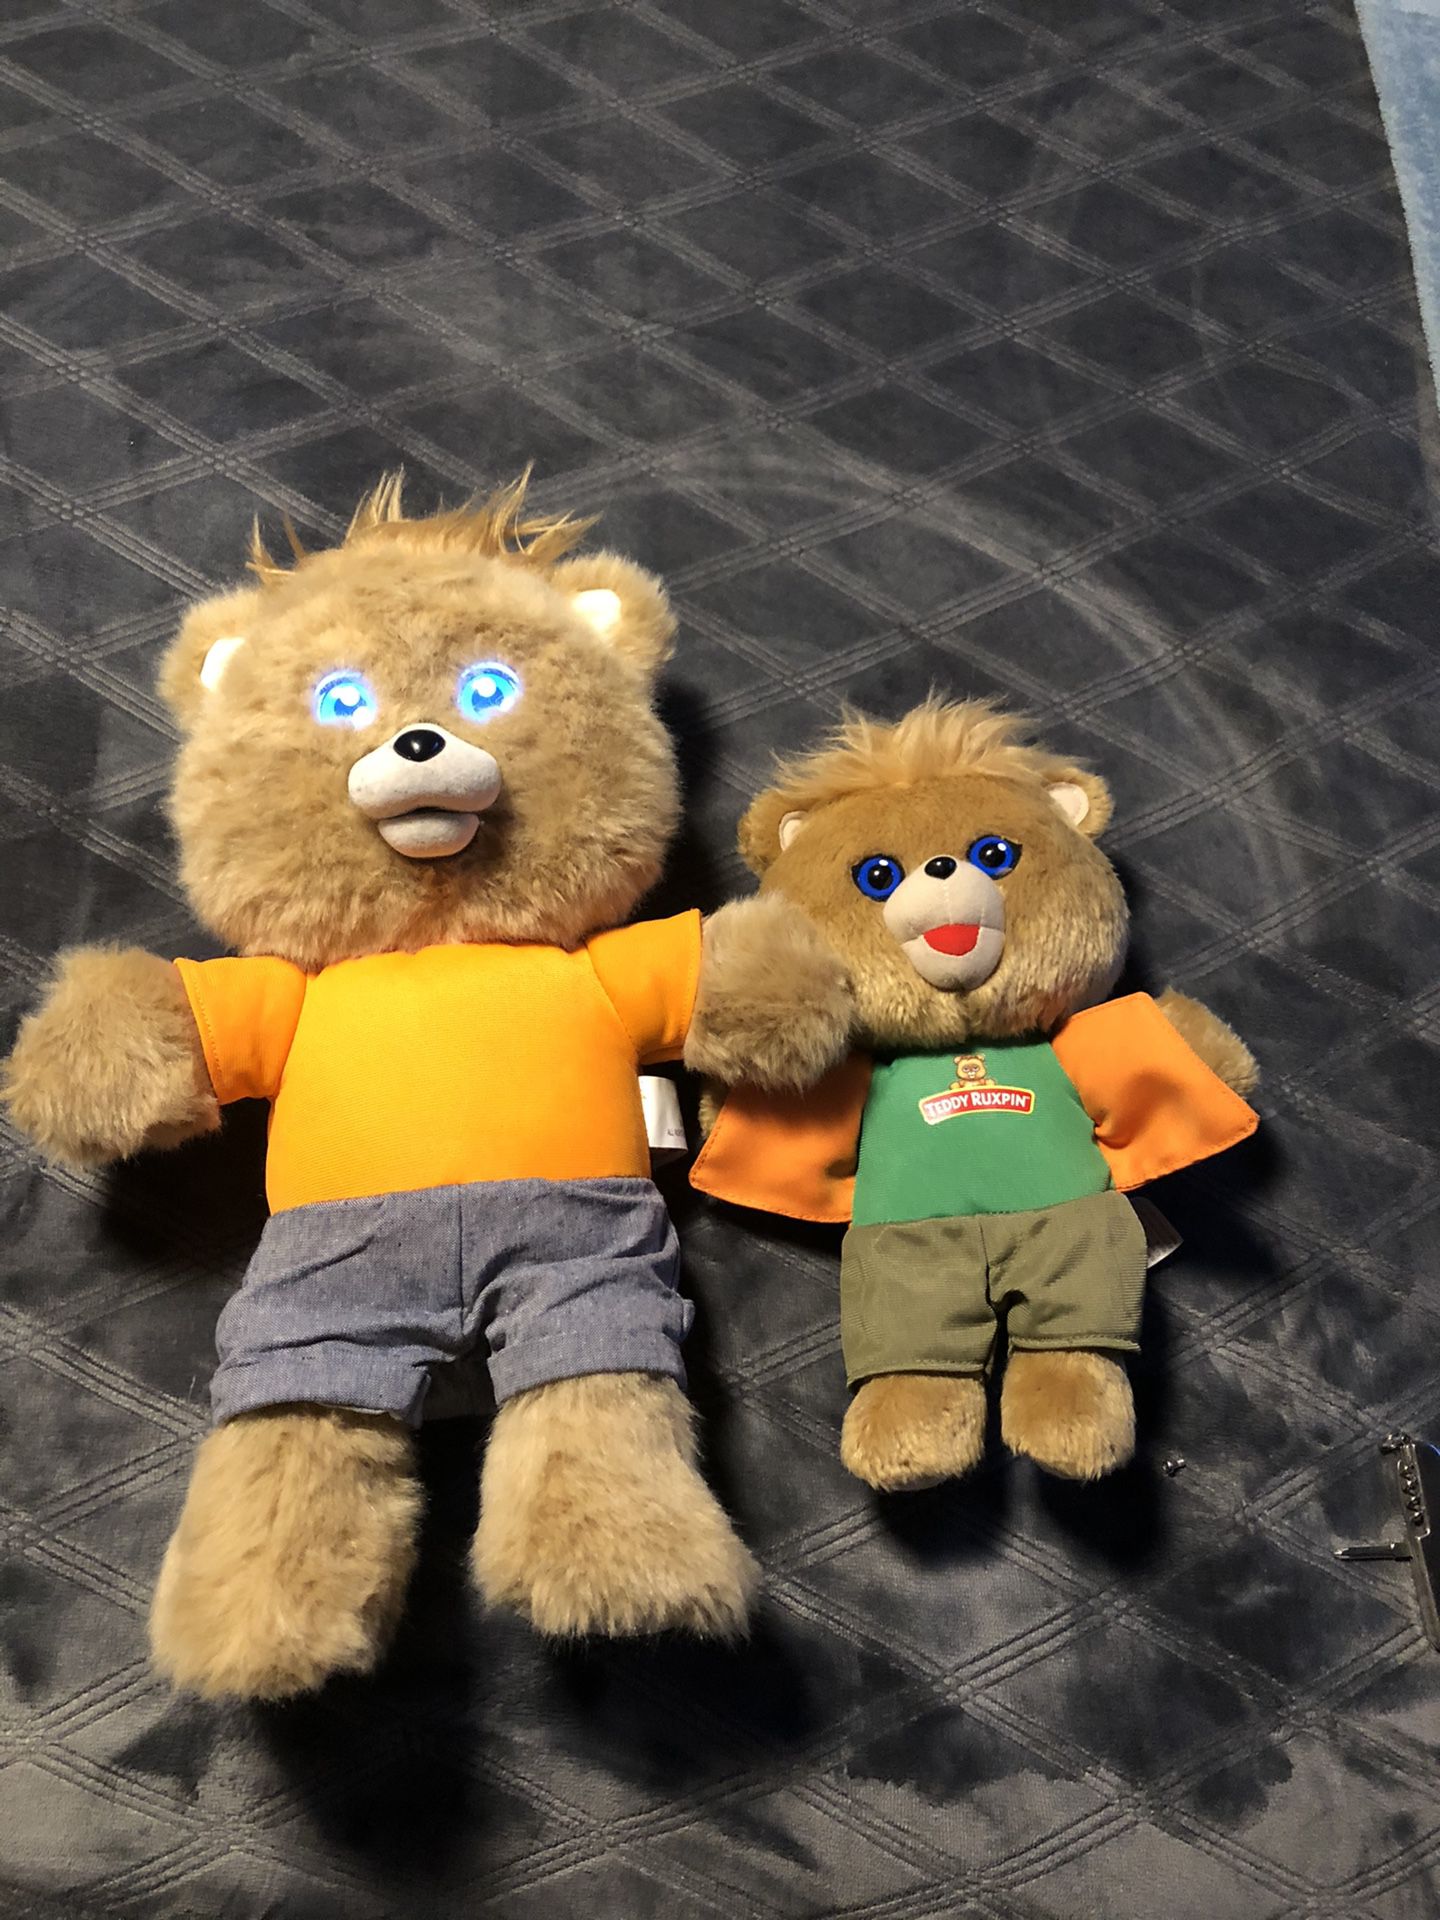 Teddy Ruxpin Lot Of 2 TASTED Big One No Batteries Included , Small One Batteries Included